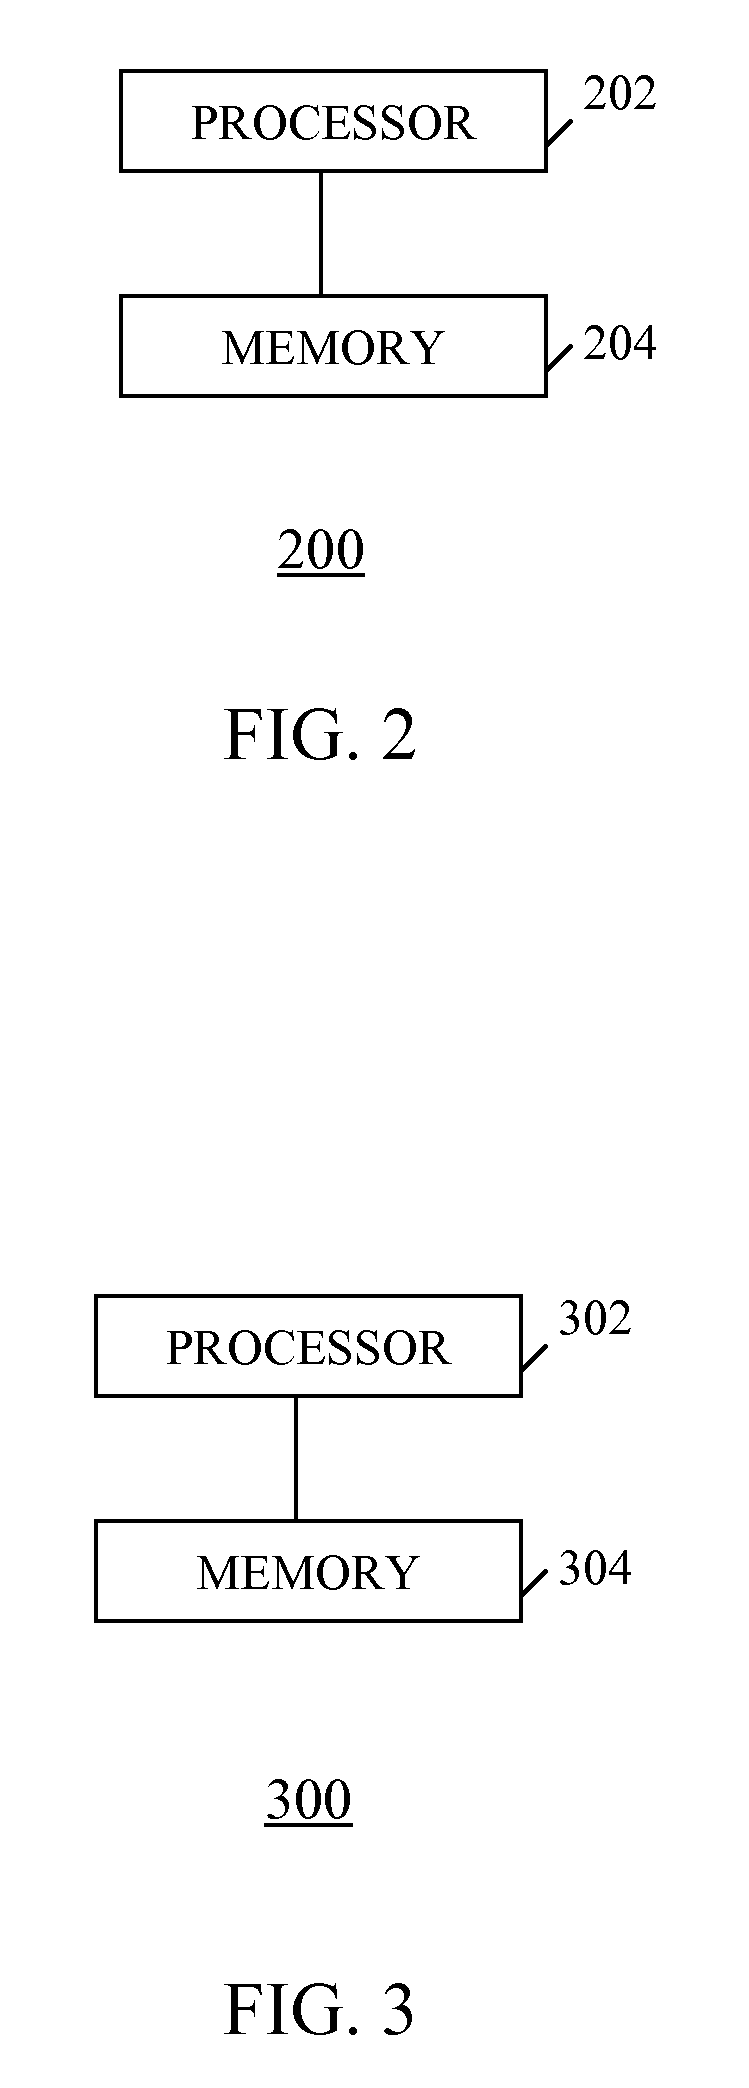 Method and apparatus for uplink power control in a frequency division multiple access communication system